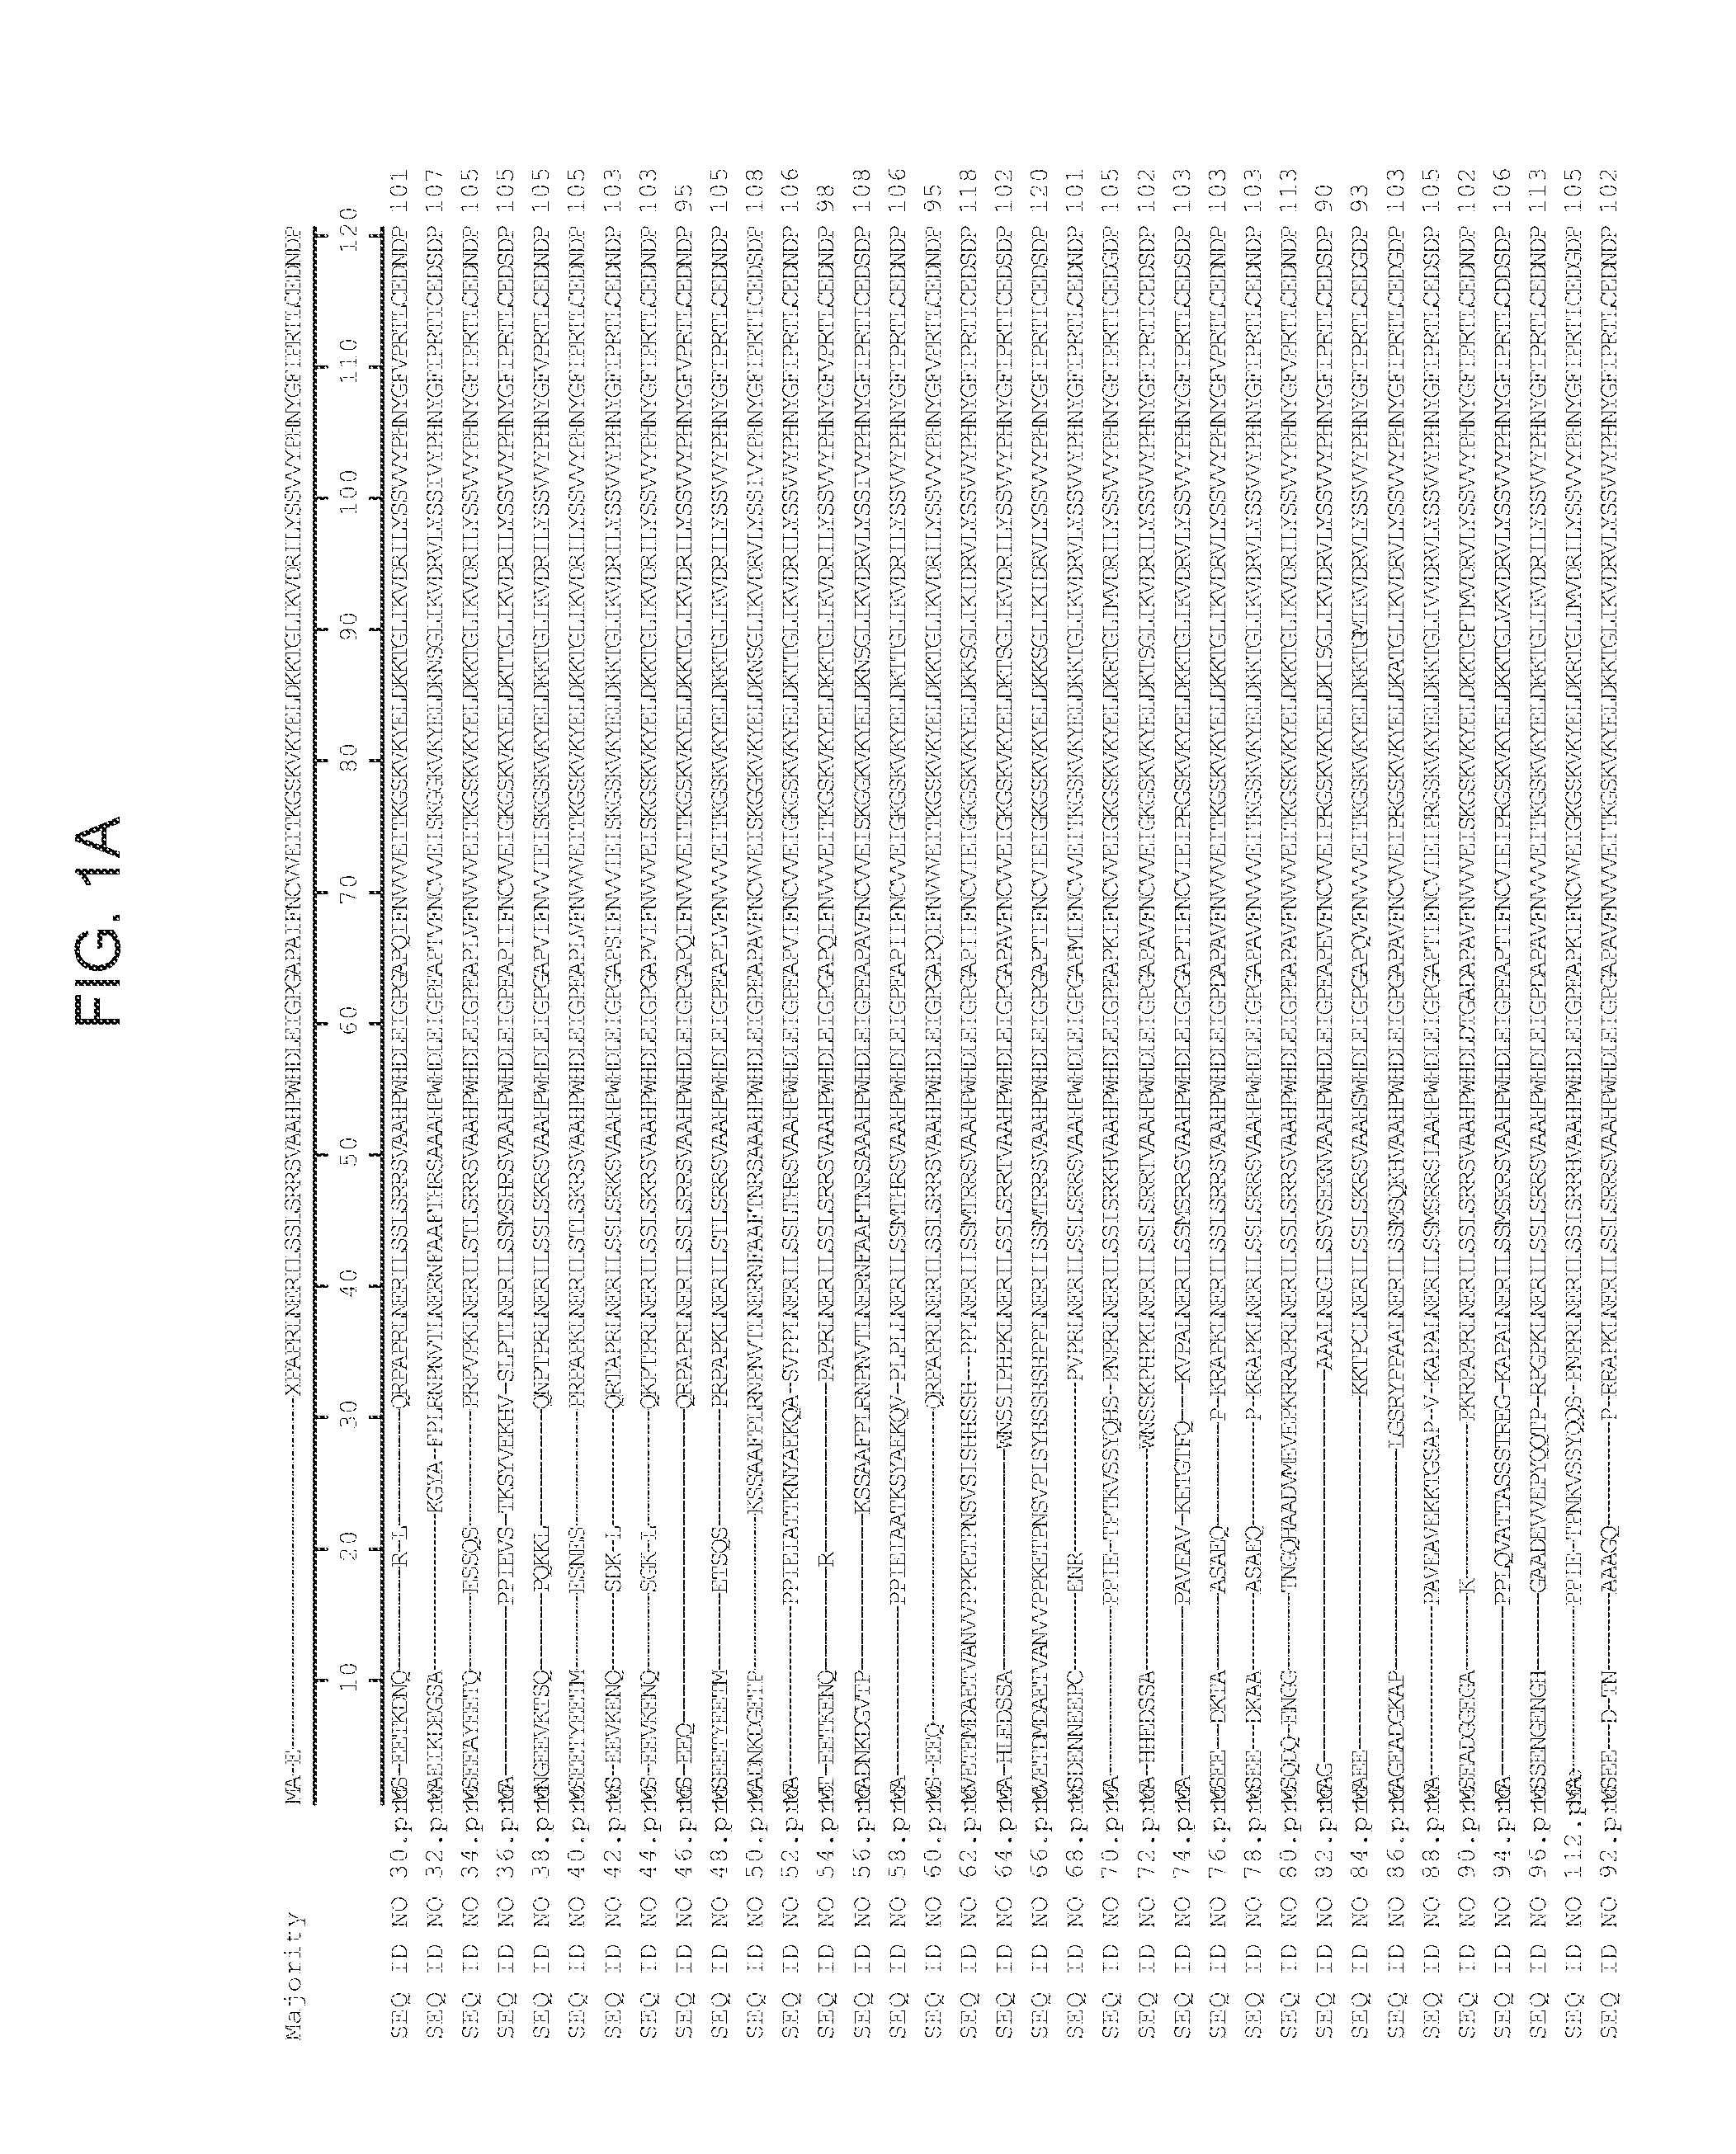 Plant seeds with alterred storage compound levels, related constructs and methods involving genes encoding cytosolic pyrophosphatase